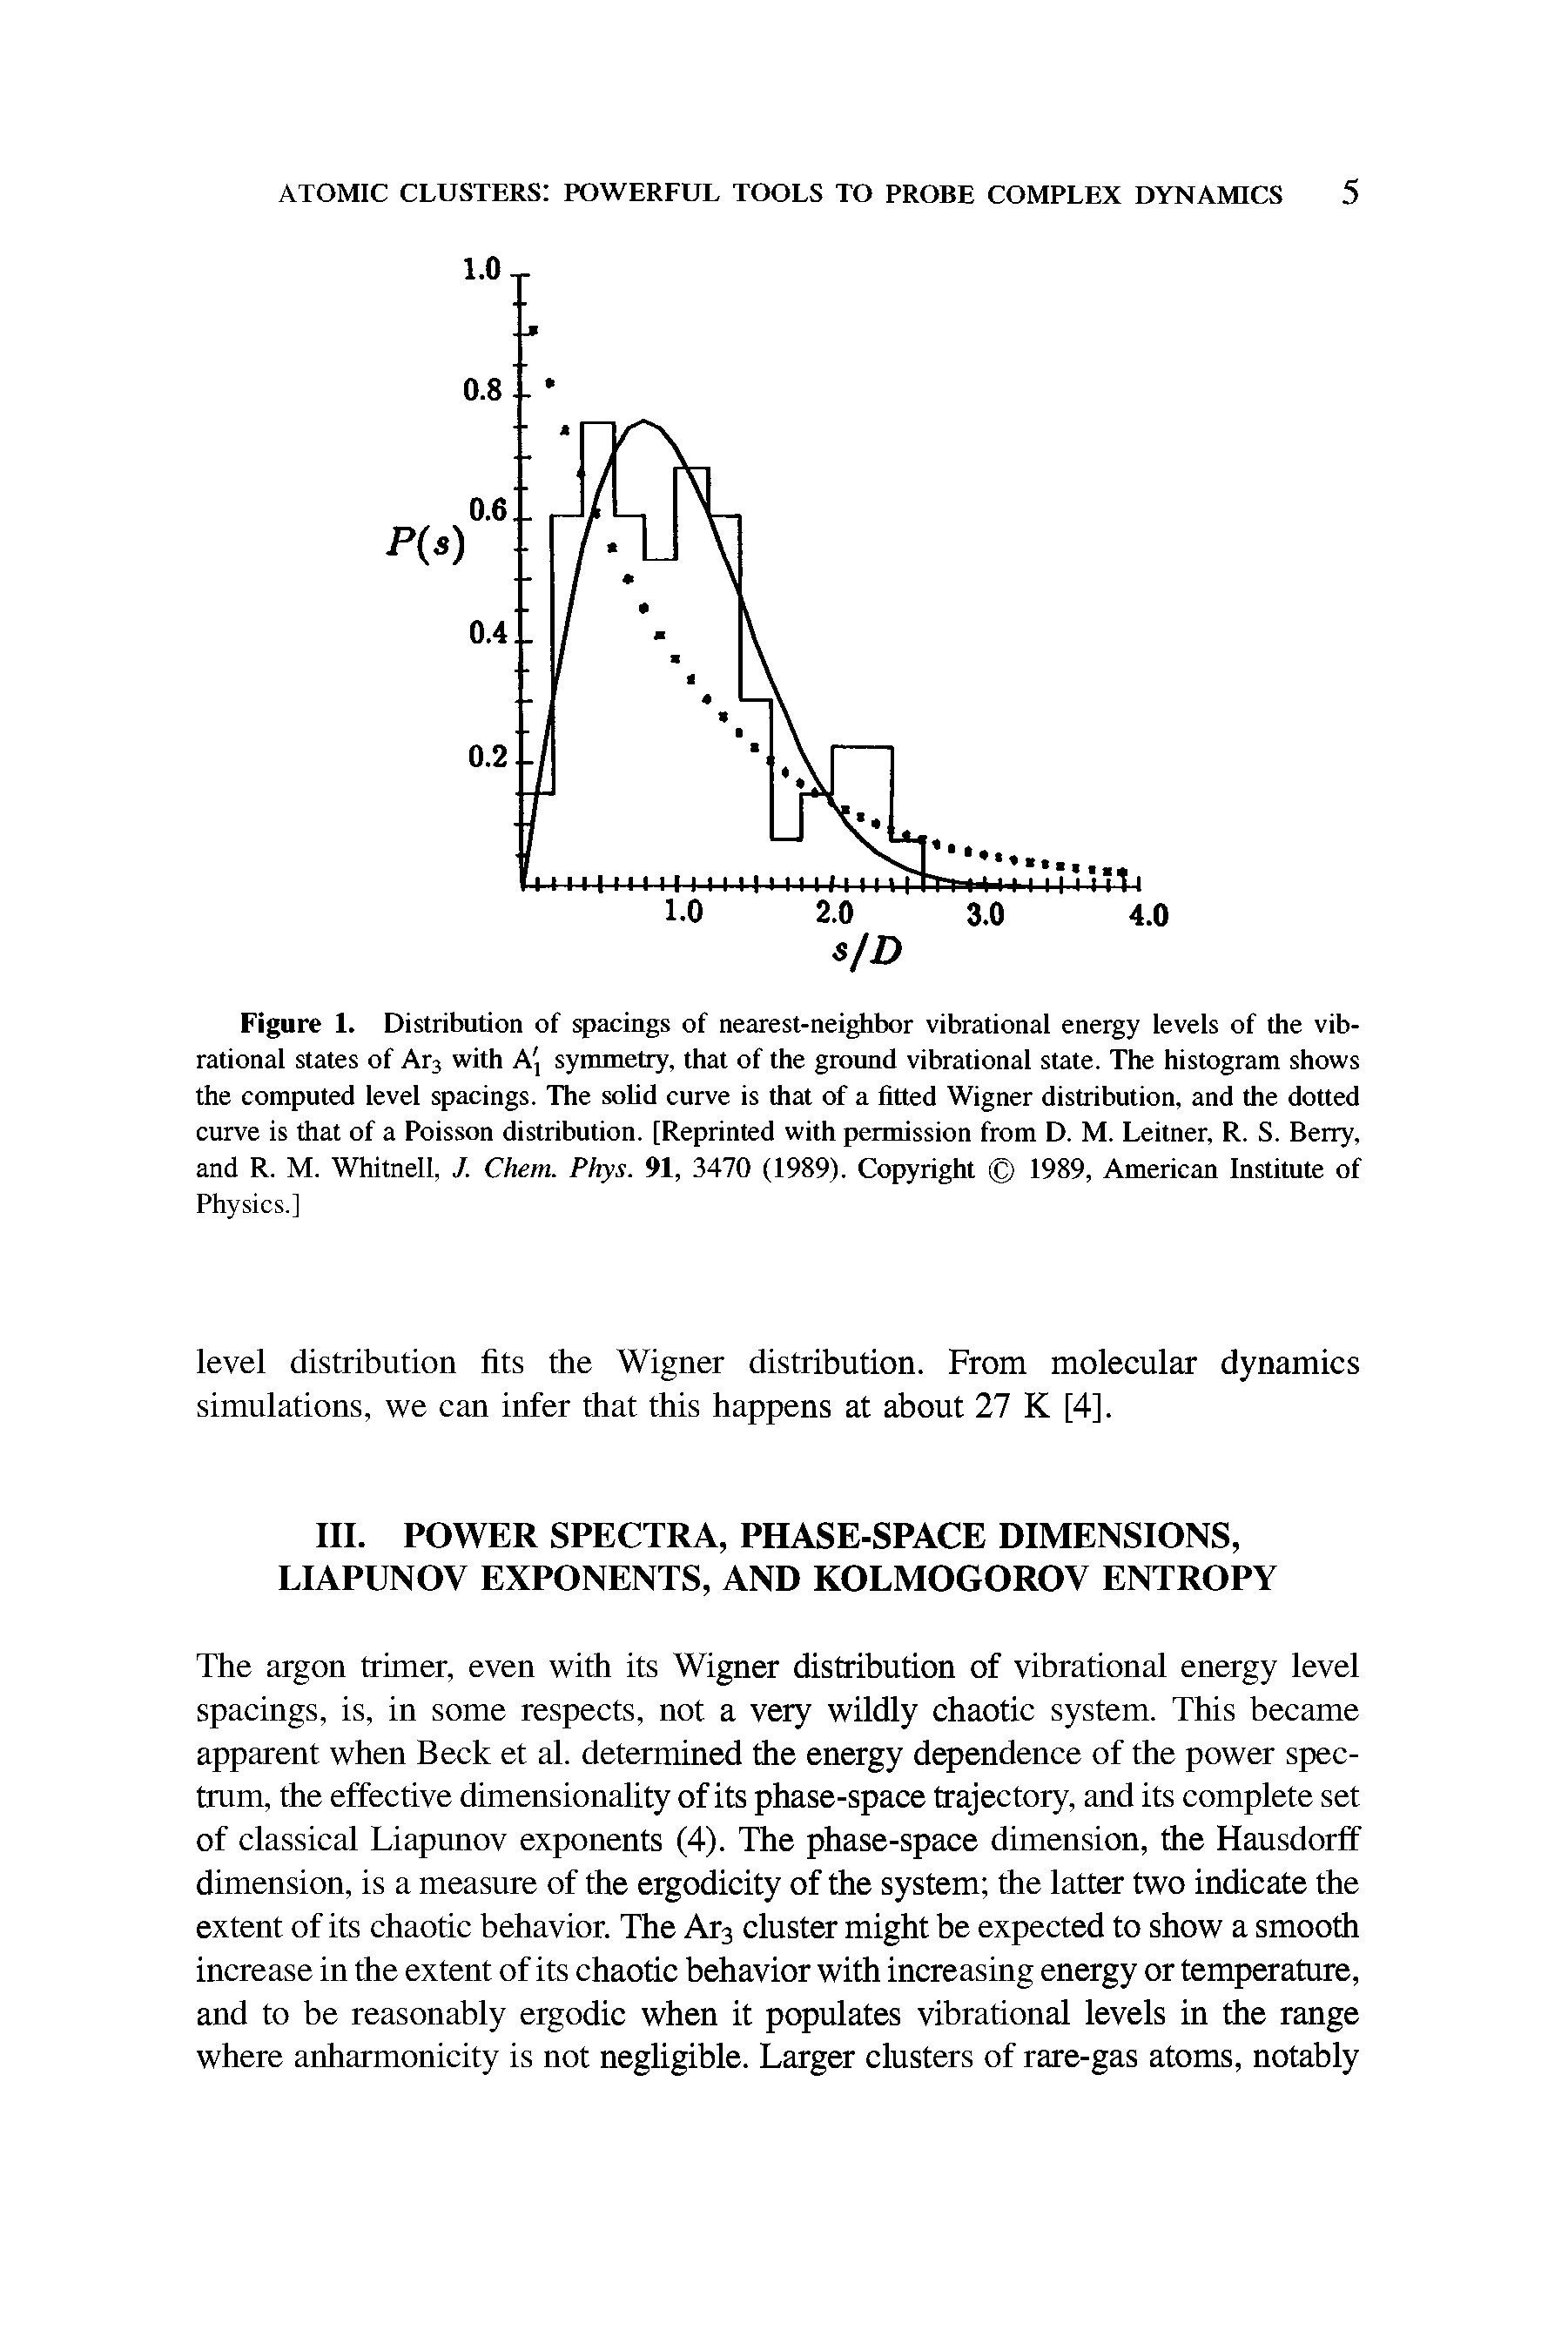 Figure 1. Distribution of spacings of nearest-neighbor vibrational energy levels of the vibrational states of Ar3 with A, symmetry, that of the ground vibrational state. The histogram shows the computed level spacings. The solid curve is that of a fitted Wigner distribution, and the dotted curve is that of a Poisson distribution. [Reprinted with permission from D. M. Leitner, R. S. Berry, and R. M. Whitnell,, /. Chem. Phys. 91, 3470 (1989). Copyright 1989, American Institute of Physics.]...